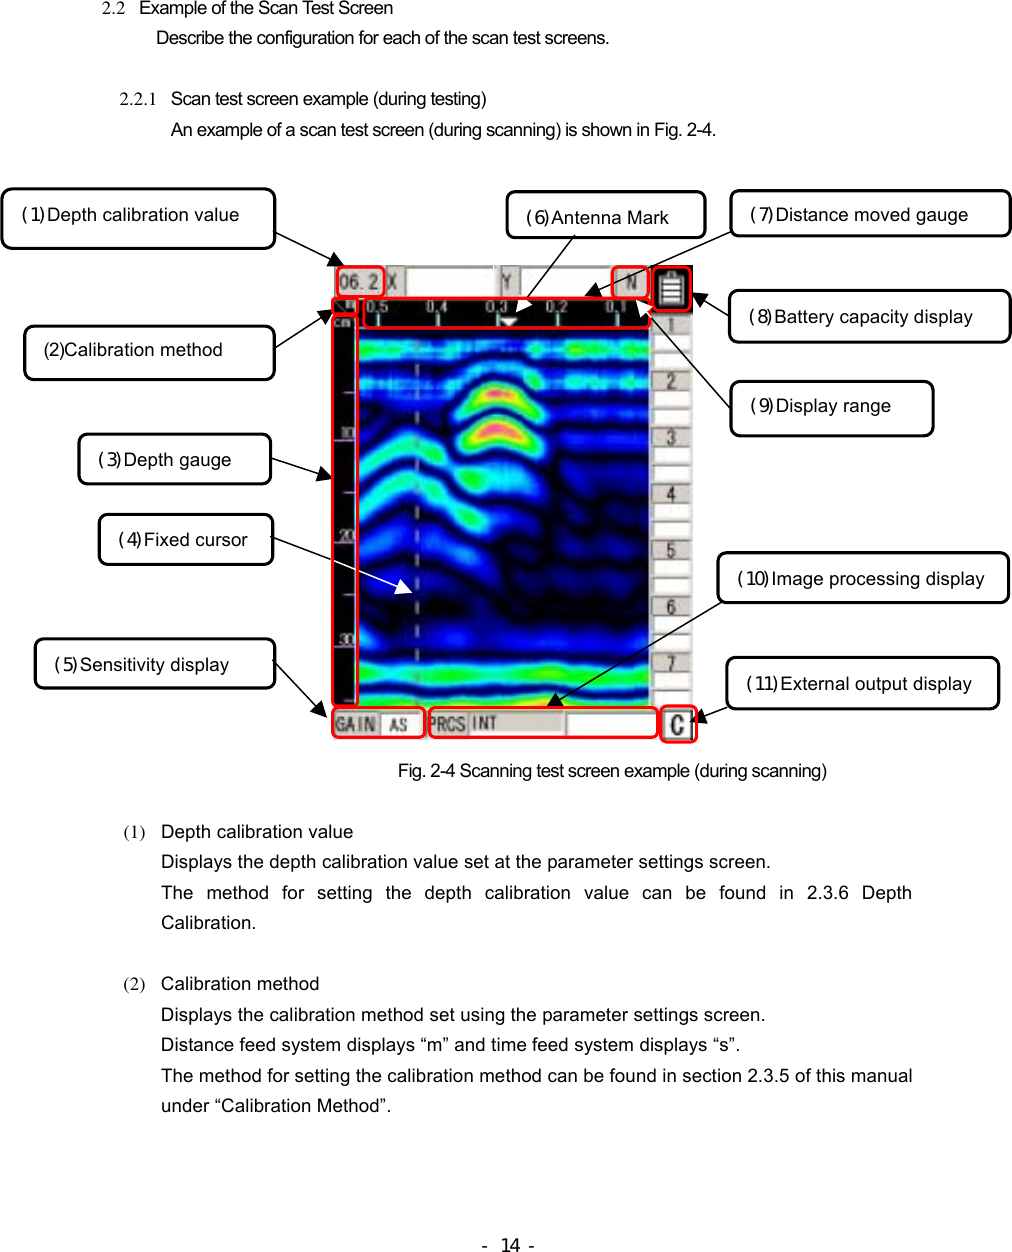  2.2   Example of the Scan Test Screen Describe the configuration for each of the scan test screens.  2.2.1   Scan test screen example (during testing) An example of a scan test screen (during scanning) is shown in Fig. 2-4.                     (2)Calibration method (6)Antenna Mark (7)Distance moved gauge (1)Depth calibration value (3)Depth gauge (4)Fixed cursor (8)Battery capacity display (10)Image processing display (11)External output display (9)Display range (5)Sensitivity display Fig. 2-4 Scanning test screen example (during scanning)  (1)  Depth calibration value Displays the depth calibration value set at the parameter settings screen. The method for setting the depth calibration value can be found in 2.3.6 Depth Calibration.  (2)  Calibration method Displays the calibration method set using the parameter settings screen. Distance feed system displays “m” and time feed system displays “s”. The method for setting the calibration method can be found in section 2.3.5 of this manual under “Calibration Method”.  - 14 - 